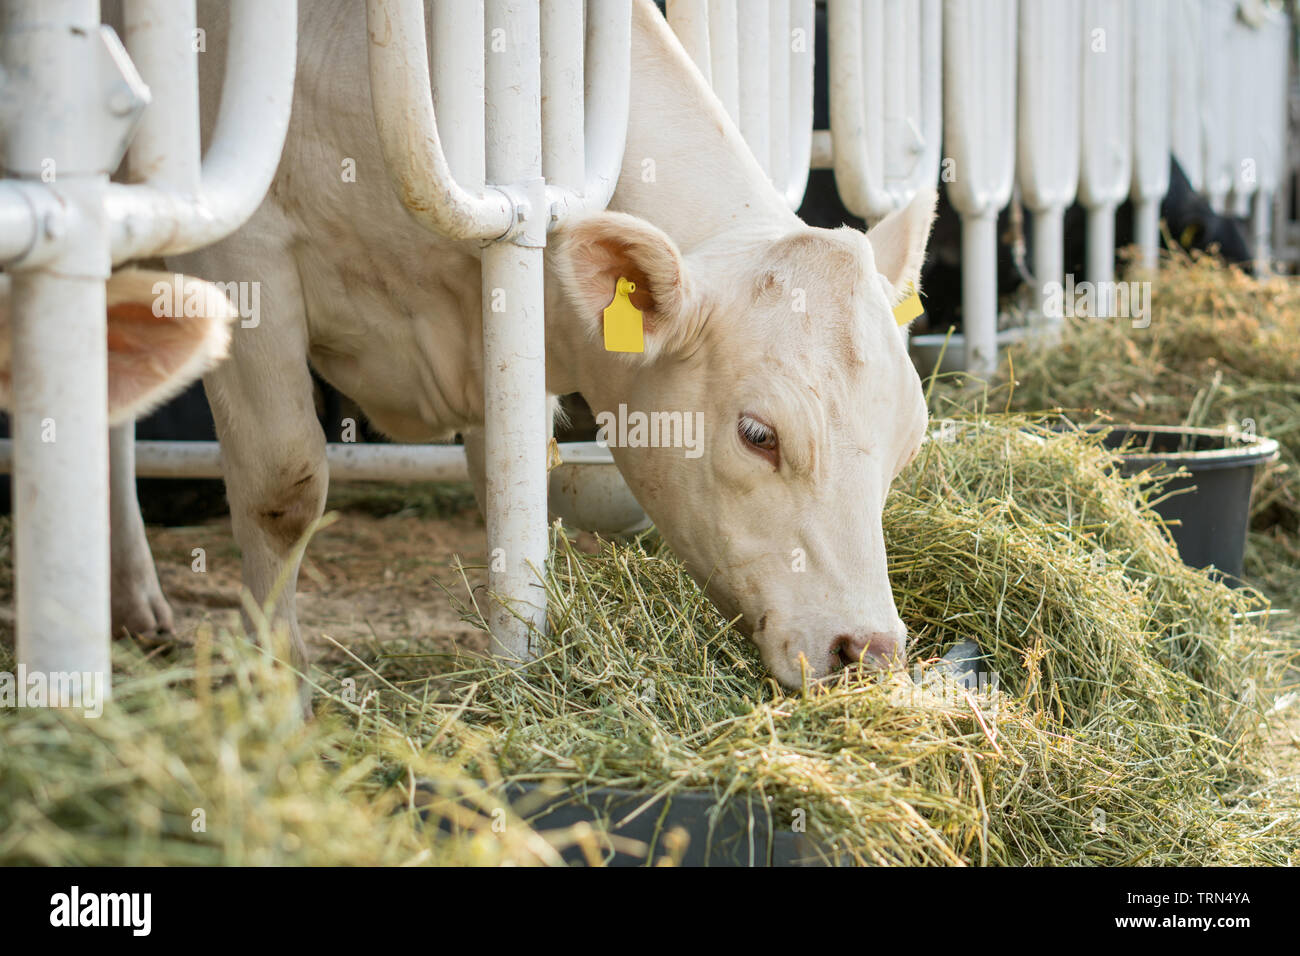 White cow in a stable eating organic hay at dairy farm. Agriculture industry farming concept Stock Photo